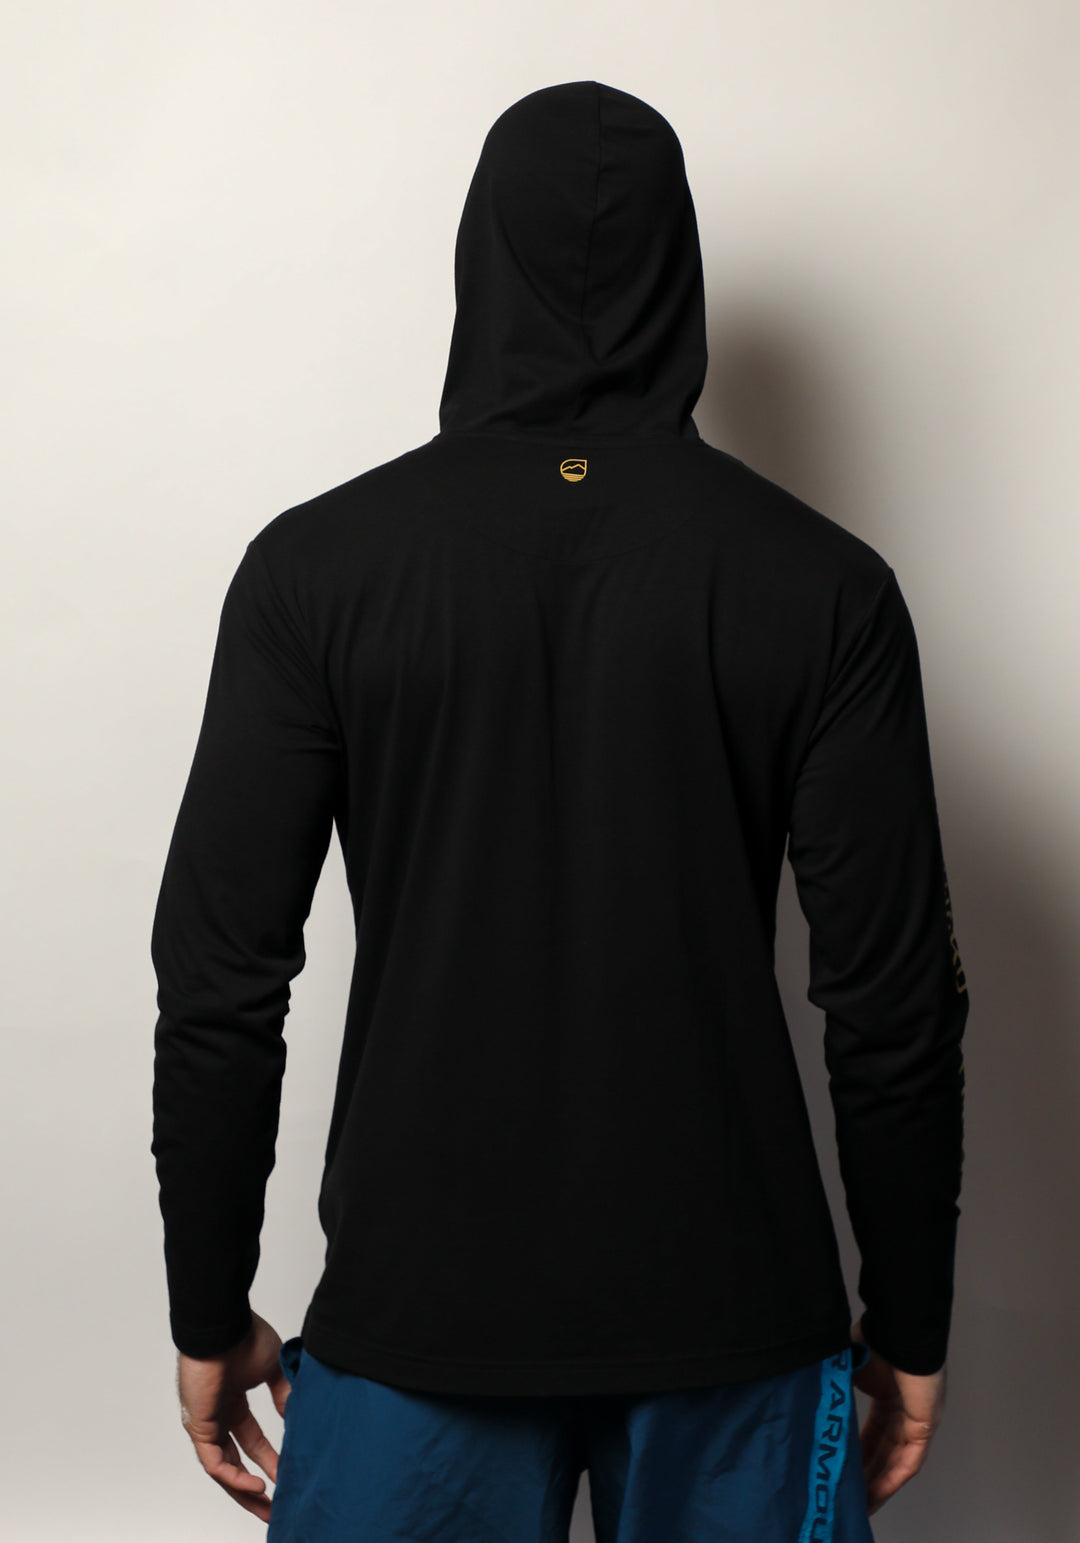 Men's Long Sleeve Hooded Shirt, UPF 45 Bamboo, Crescent City Collection